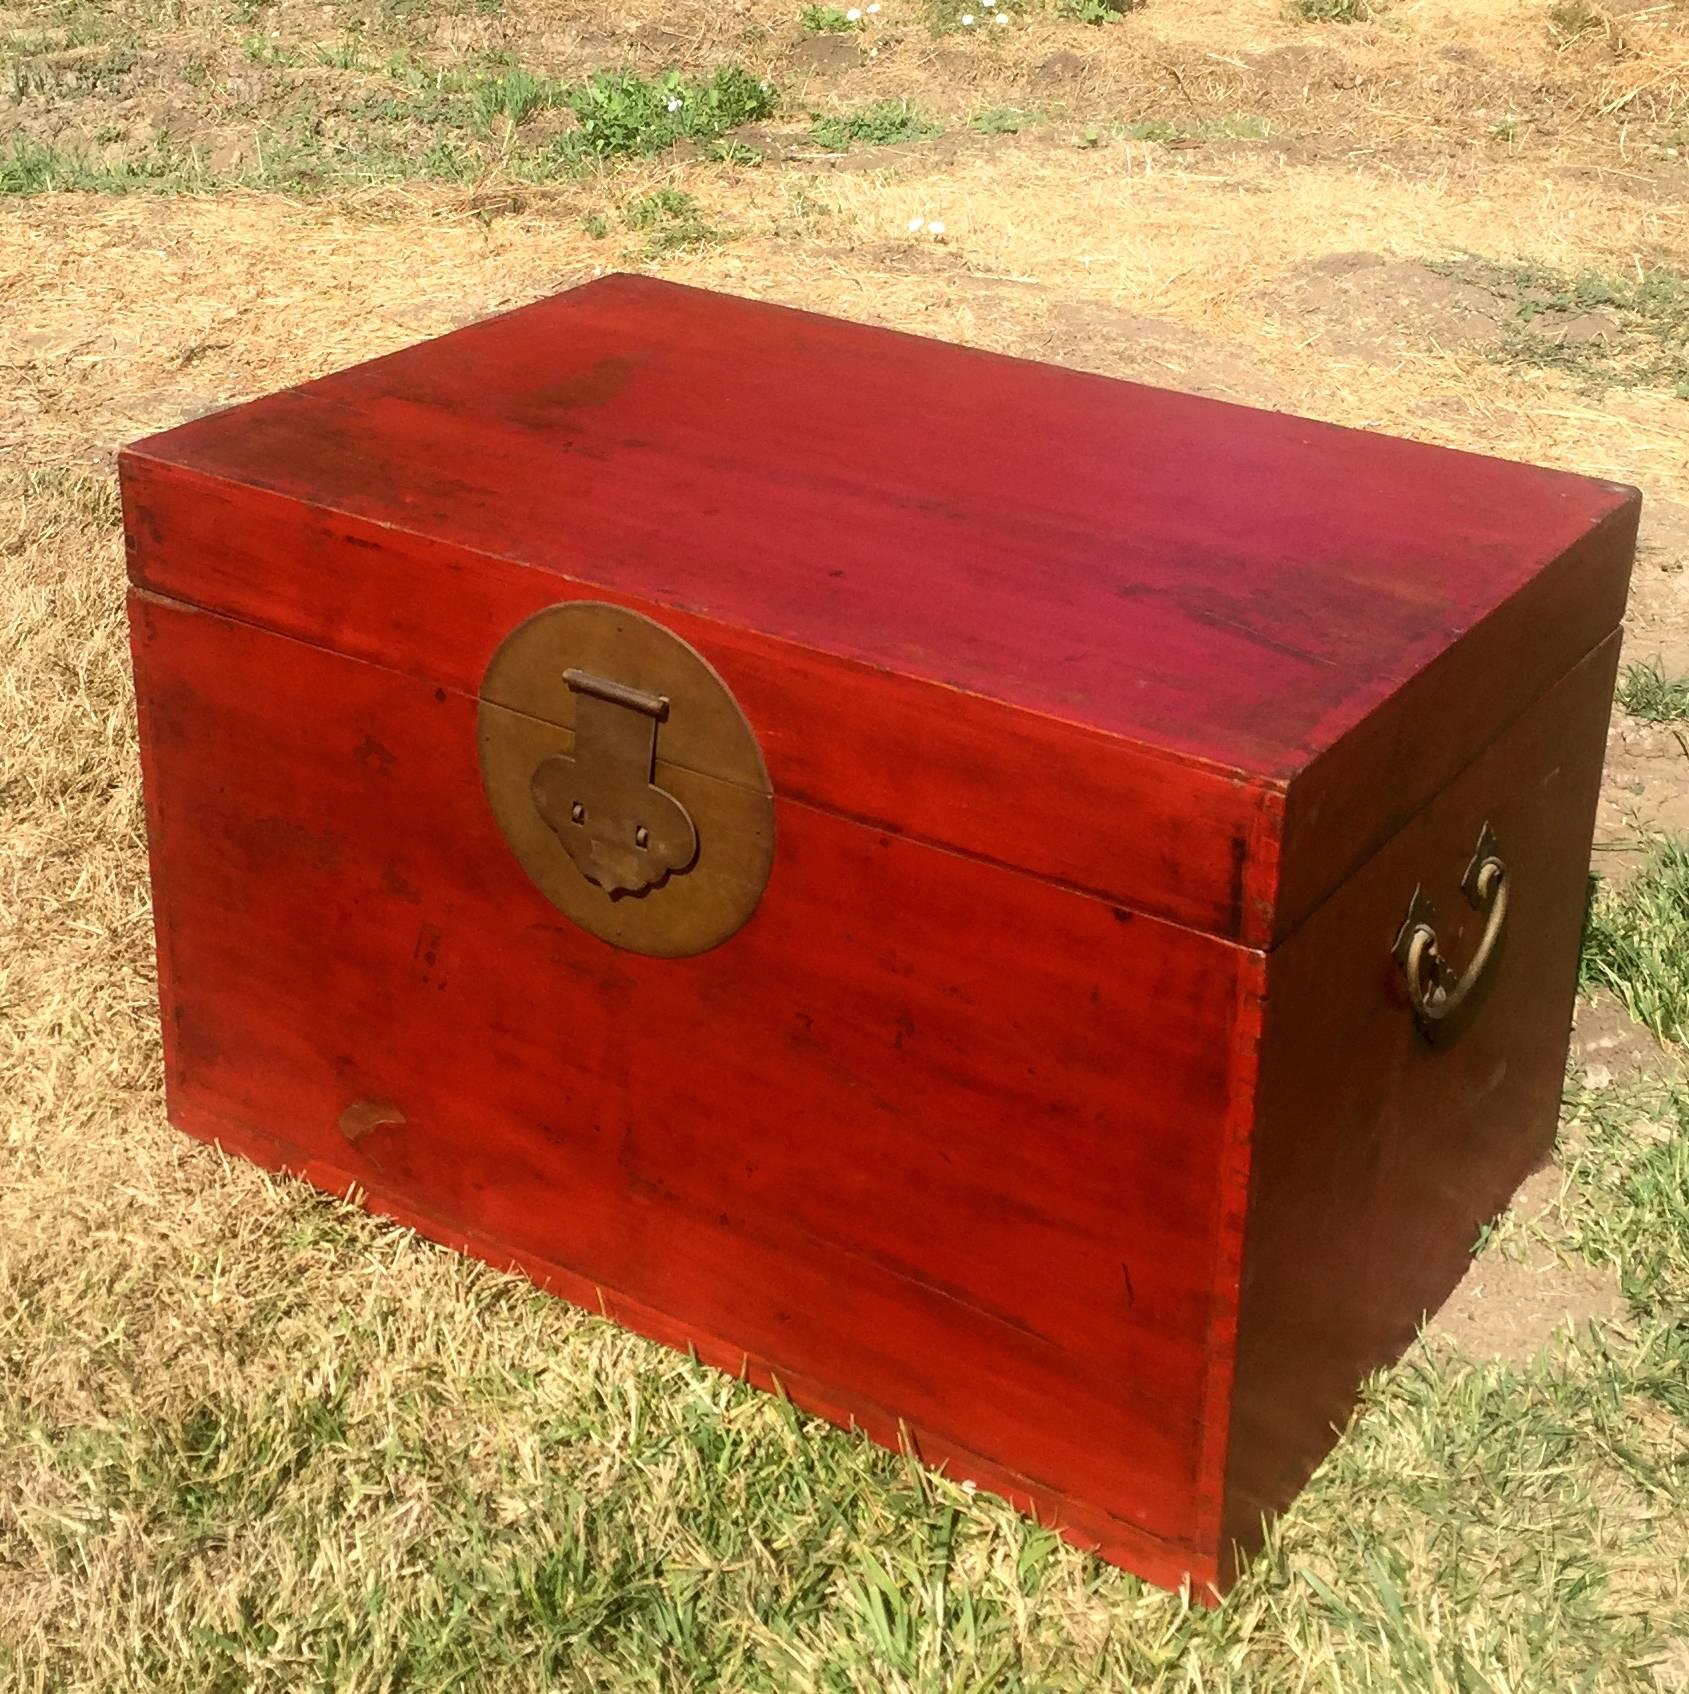 A beautiful Chinese Trunk in the color of red cinnabar. 

This wonderful piece is made of solid wood, using tenons and mortises and exquisite dovetails. The interior is large enough to store blankets. Simple stunning golden brass hardware